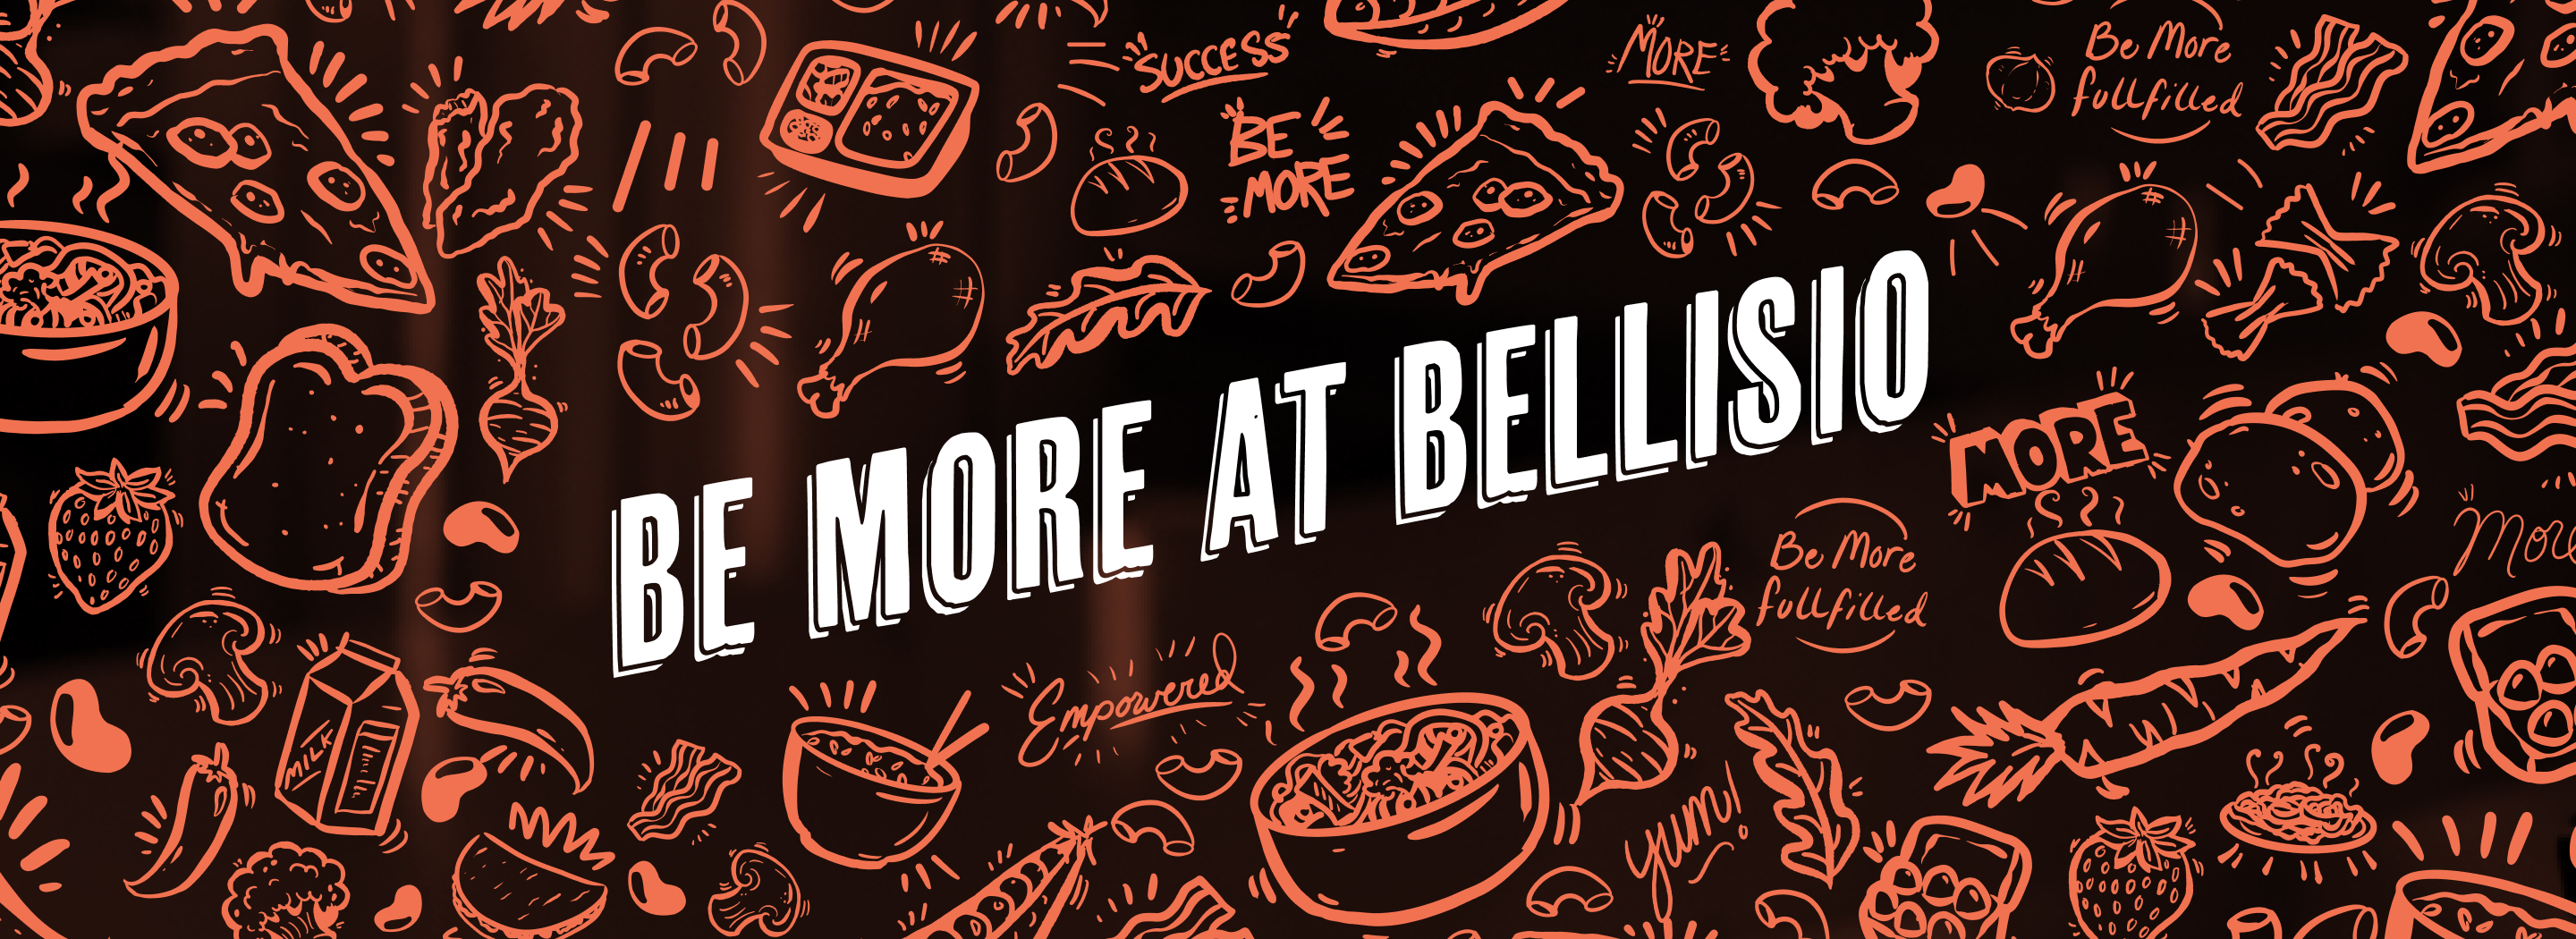 Be more at Bellisio - campaign art